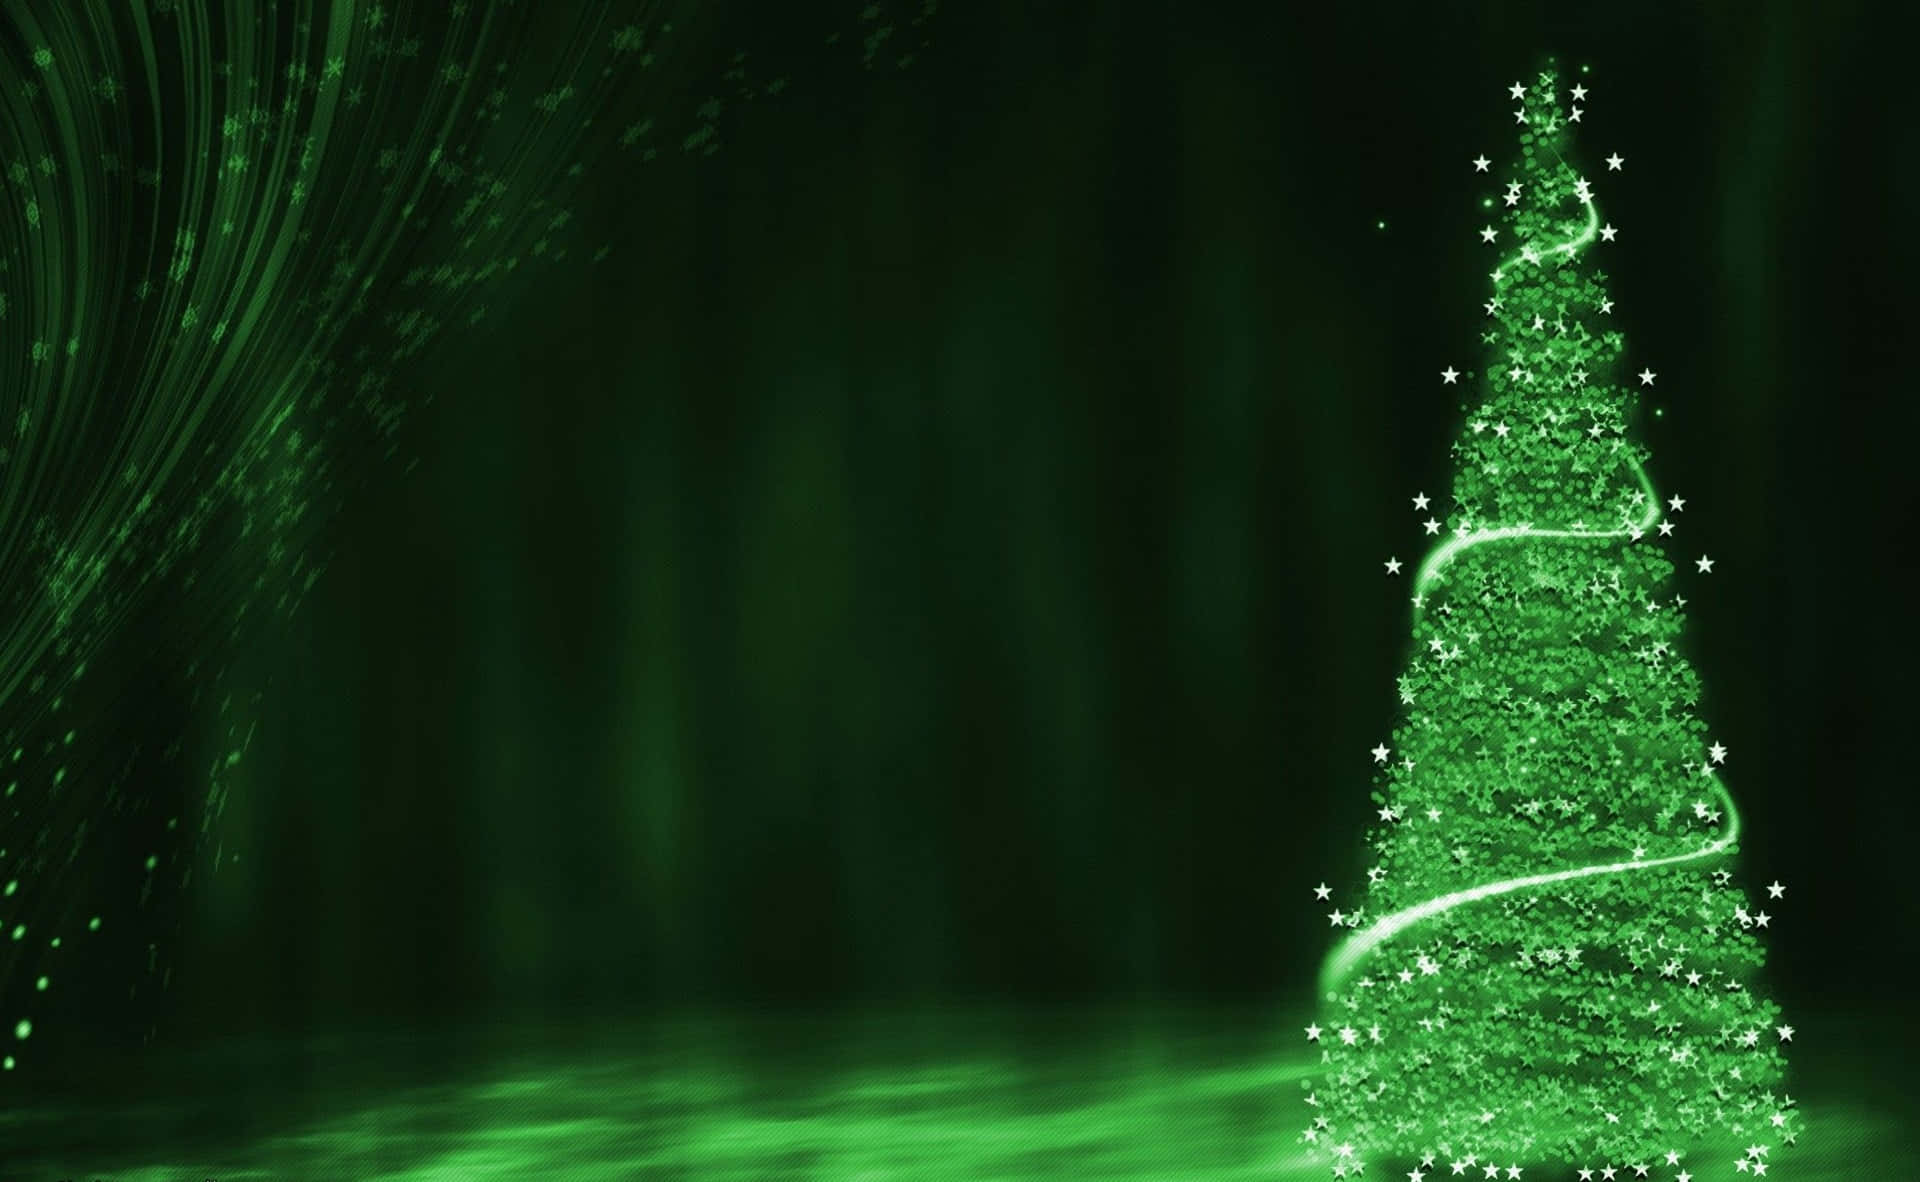 A Green Christmas Tree With Lights On It Wallpaper